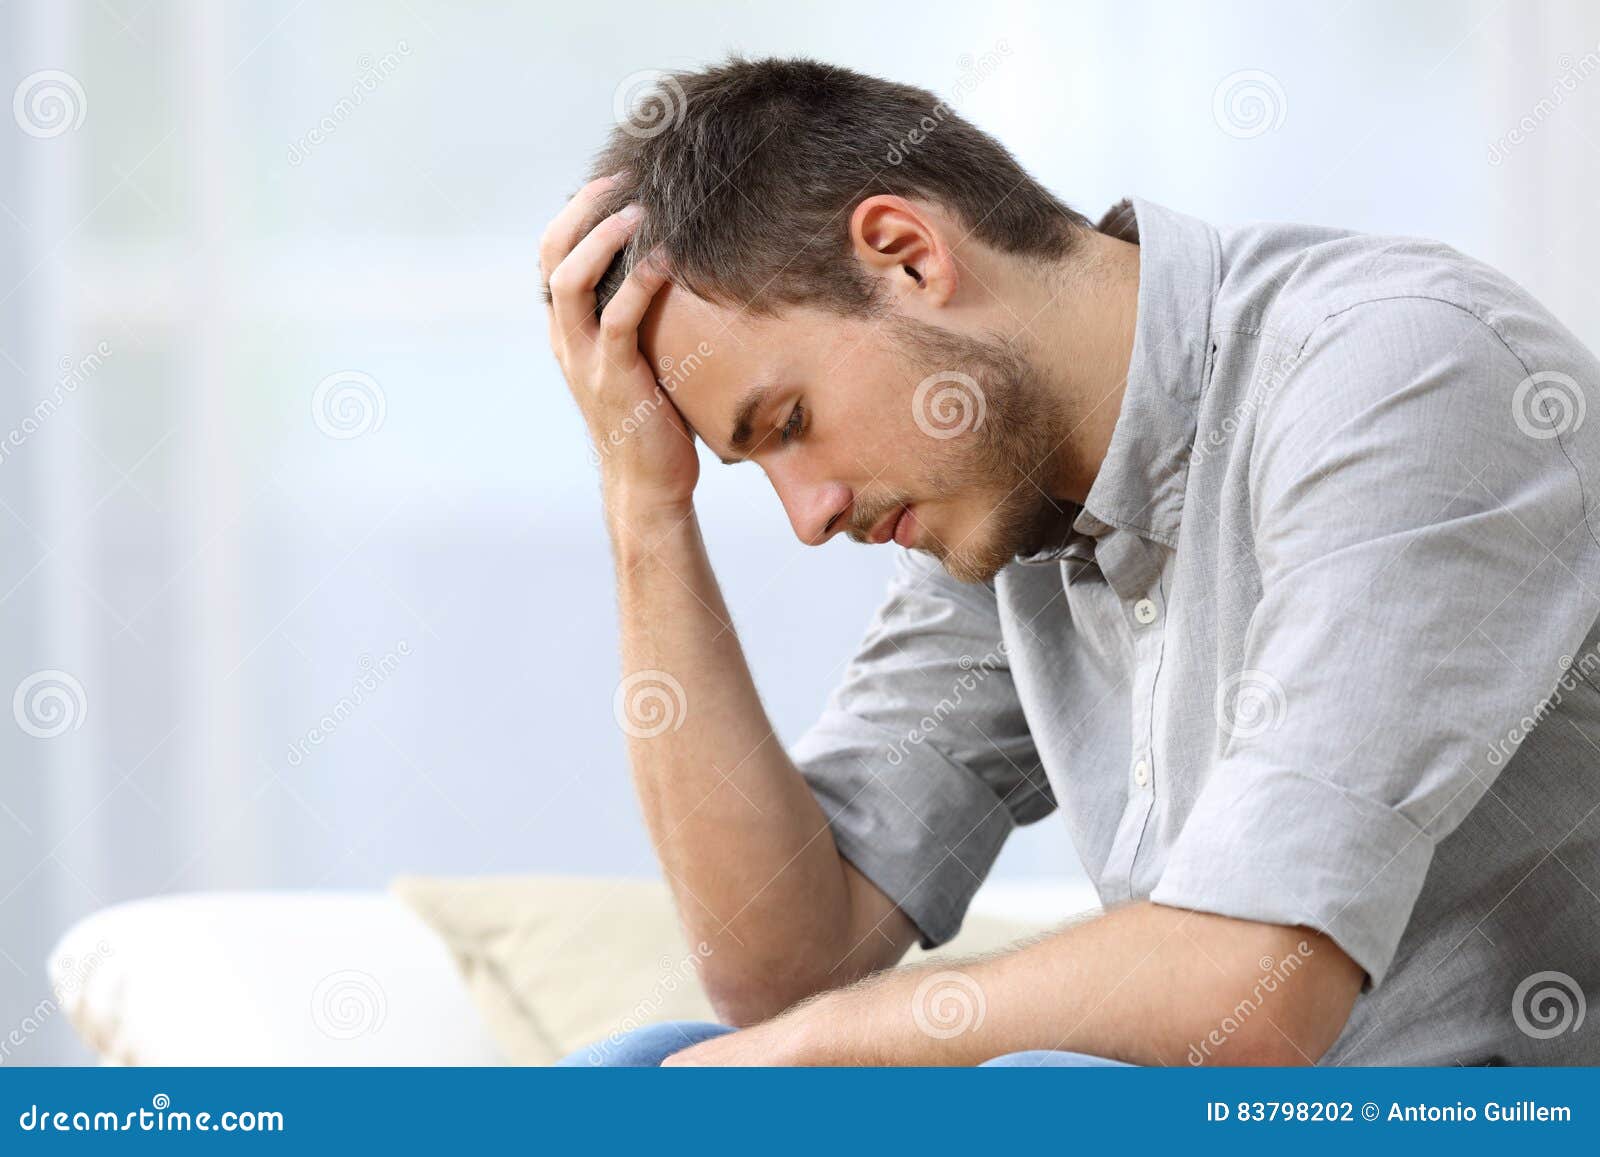 sad-man-sitting-couch-home-side-view-hand-head-living-room-83798202.jpg